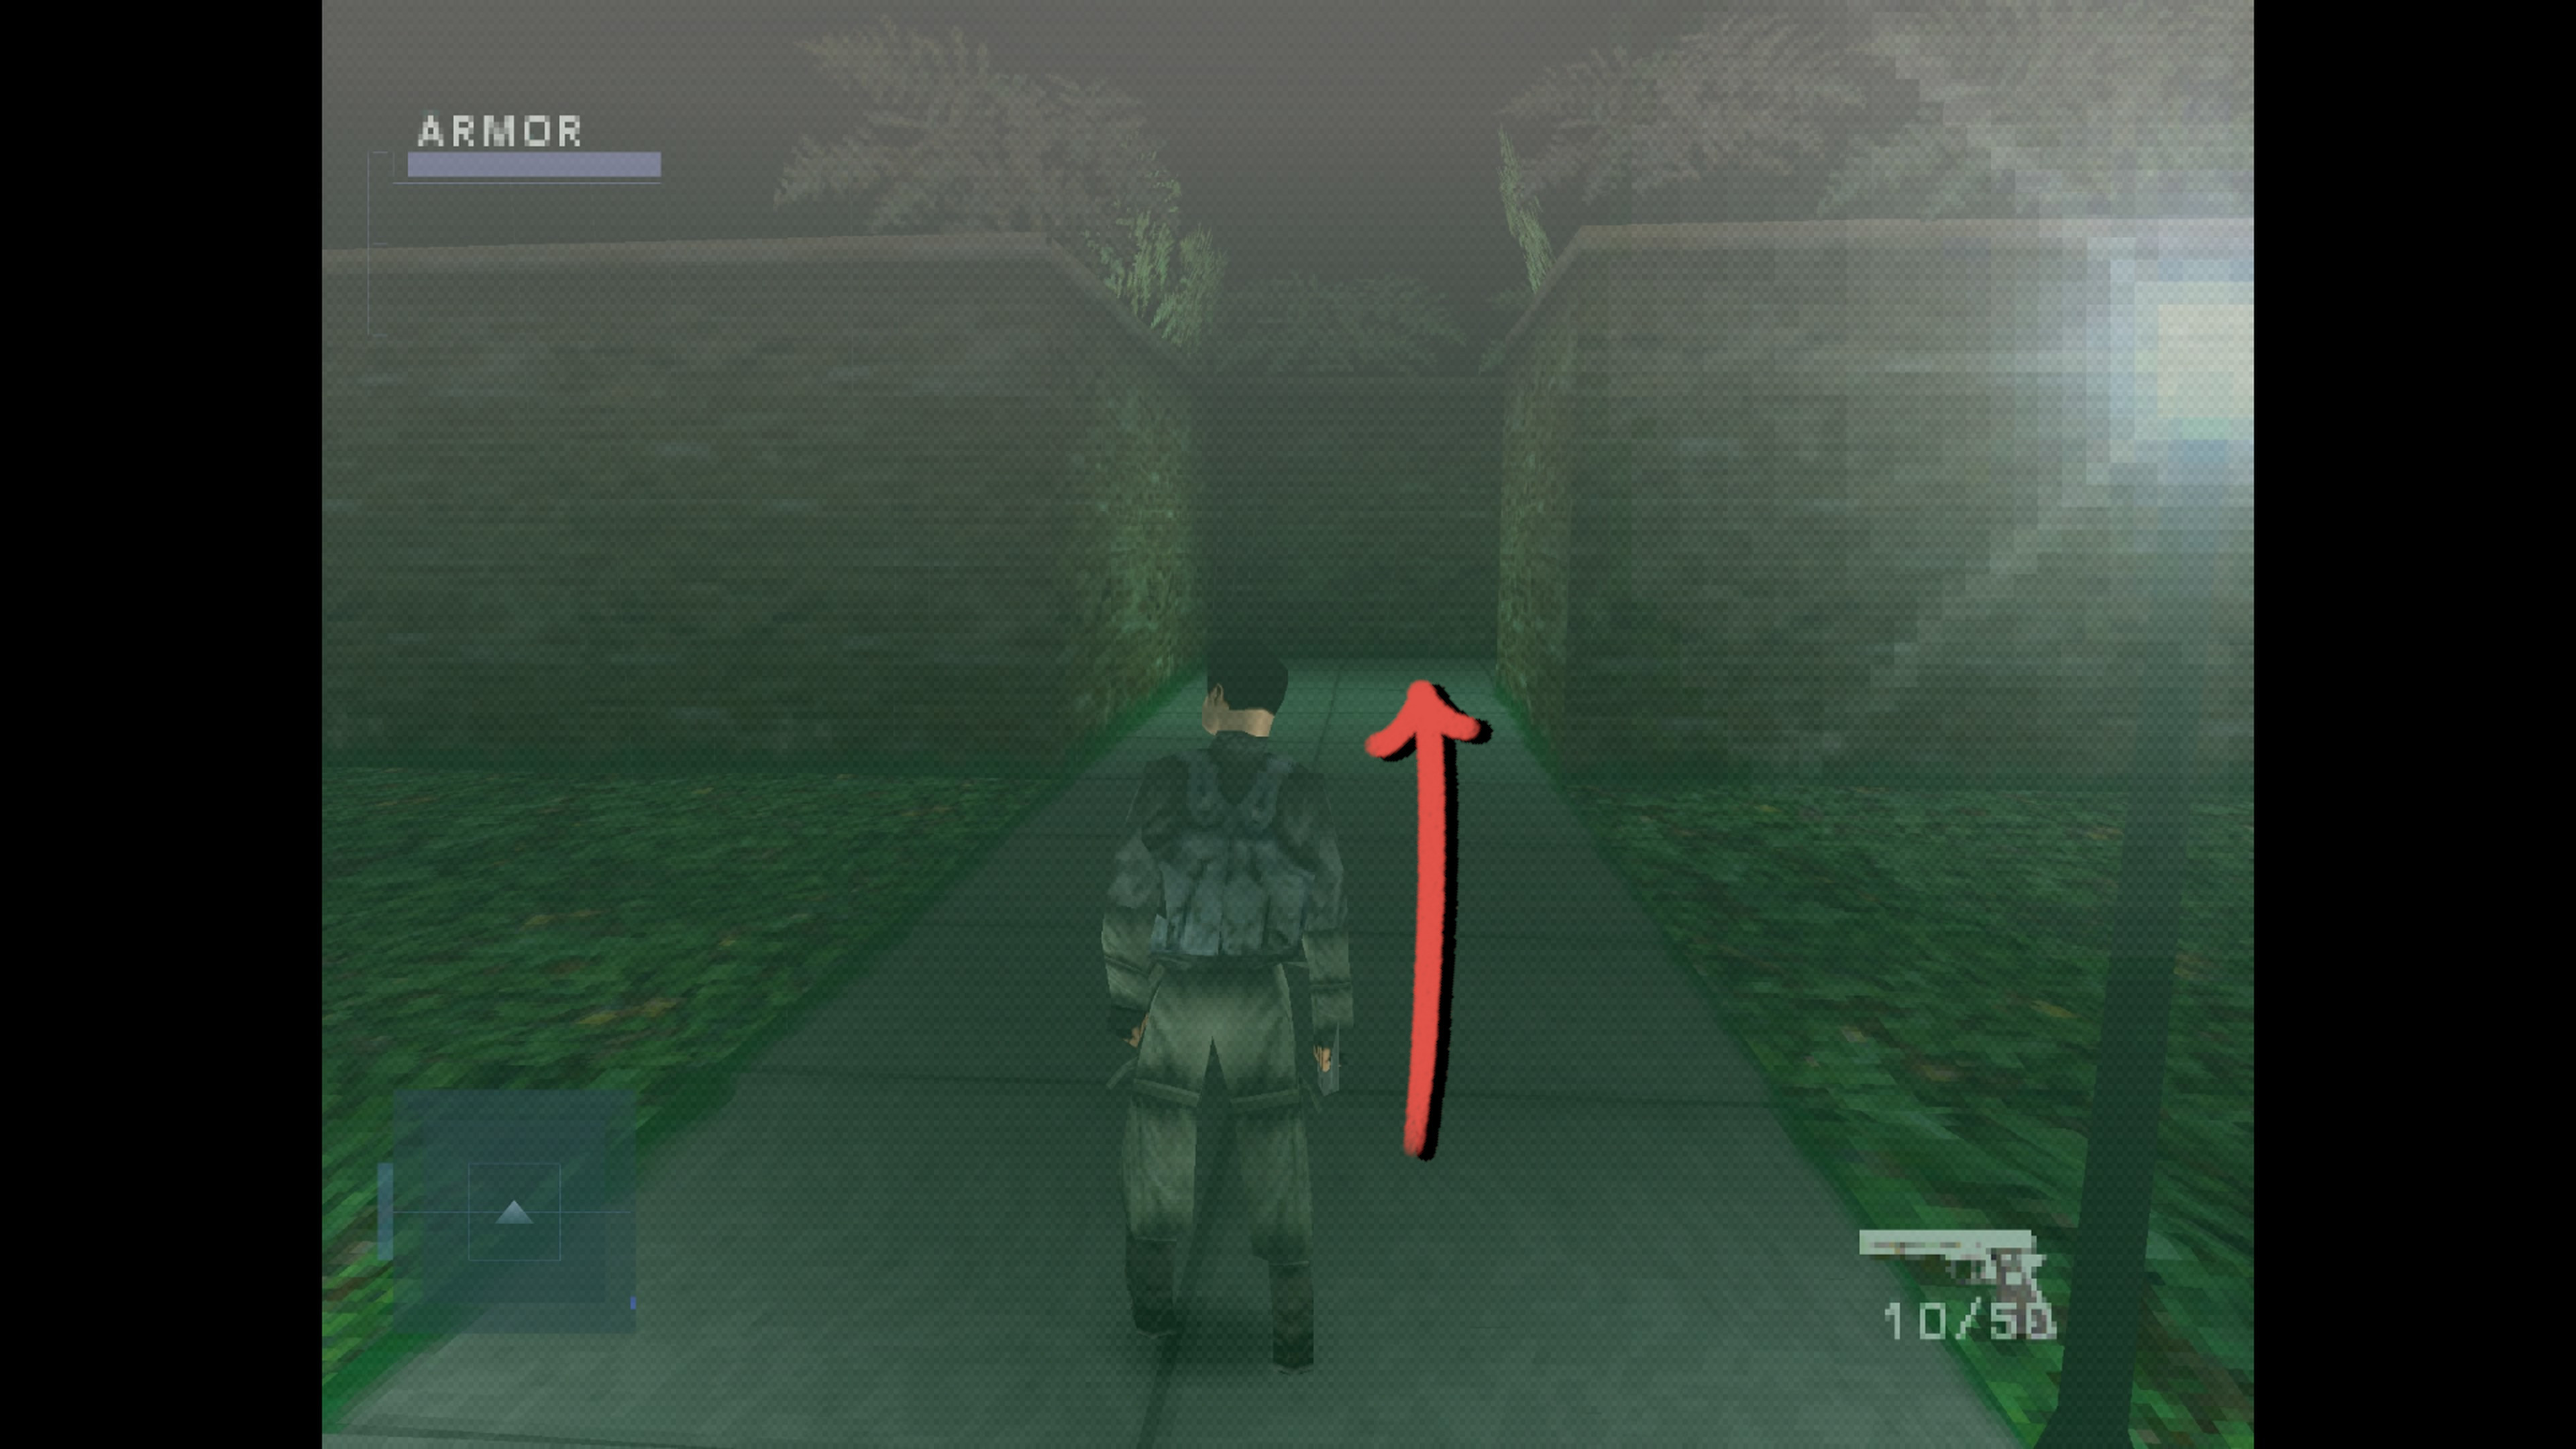 PlayStation Plus PS1 Classic 'Syphon Filter' Adds Trophy Support, What  About The Rest?